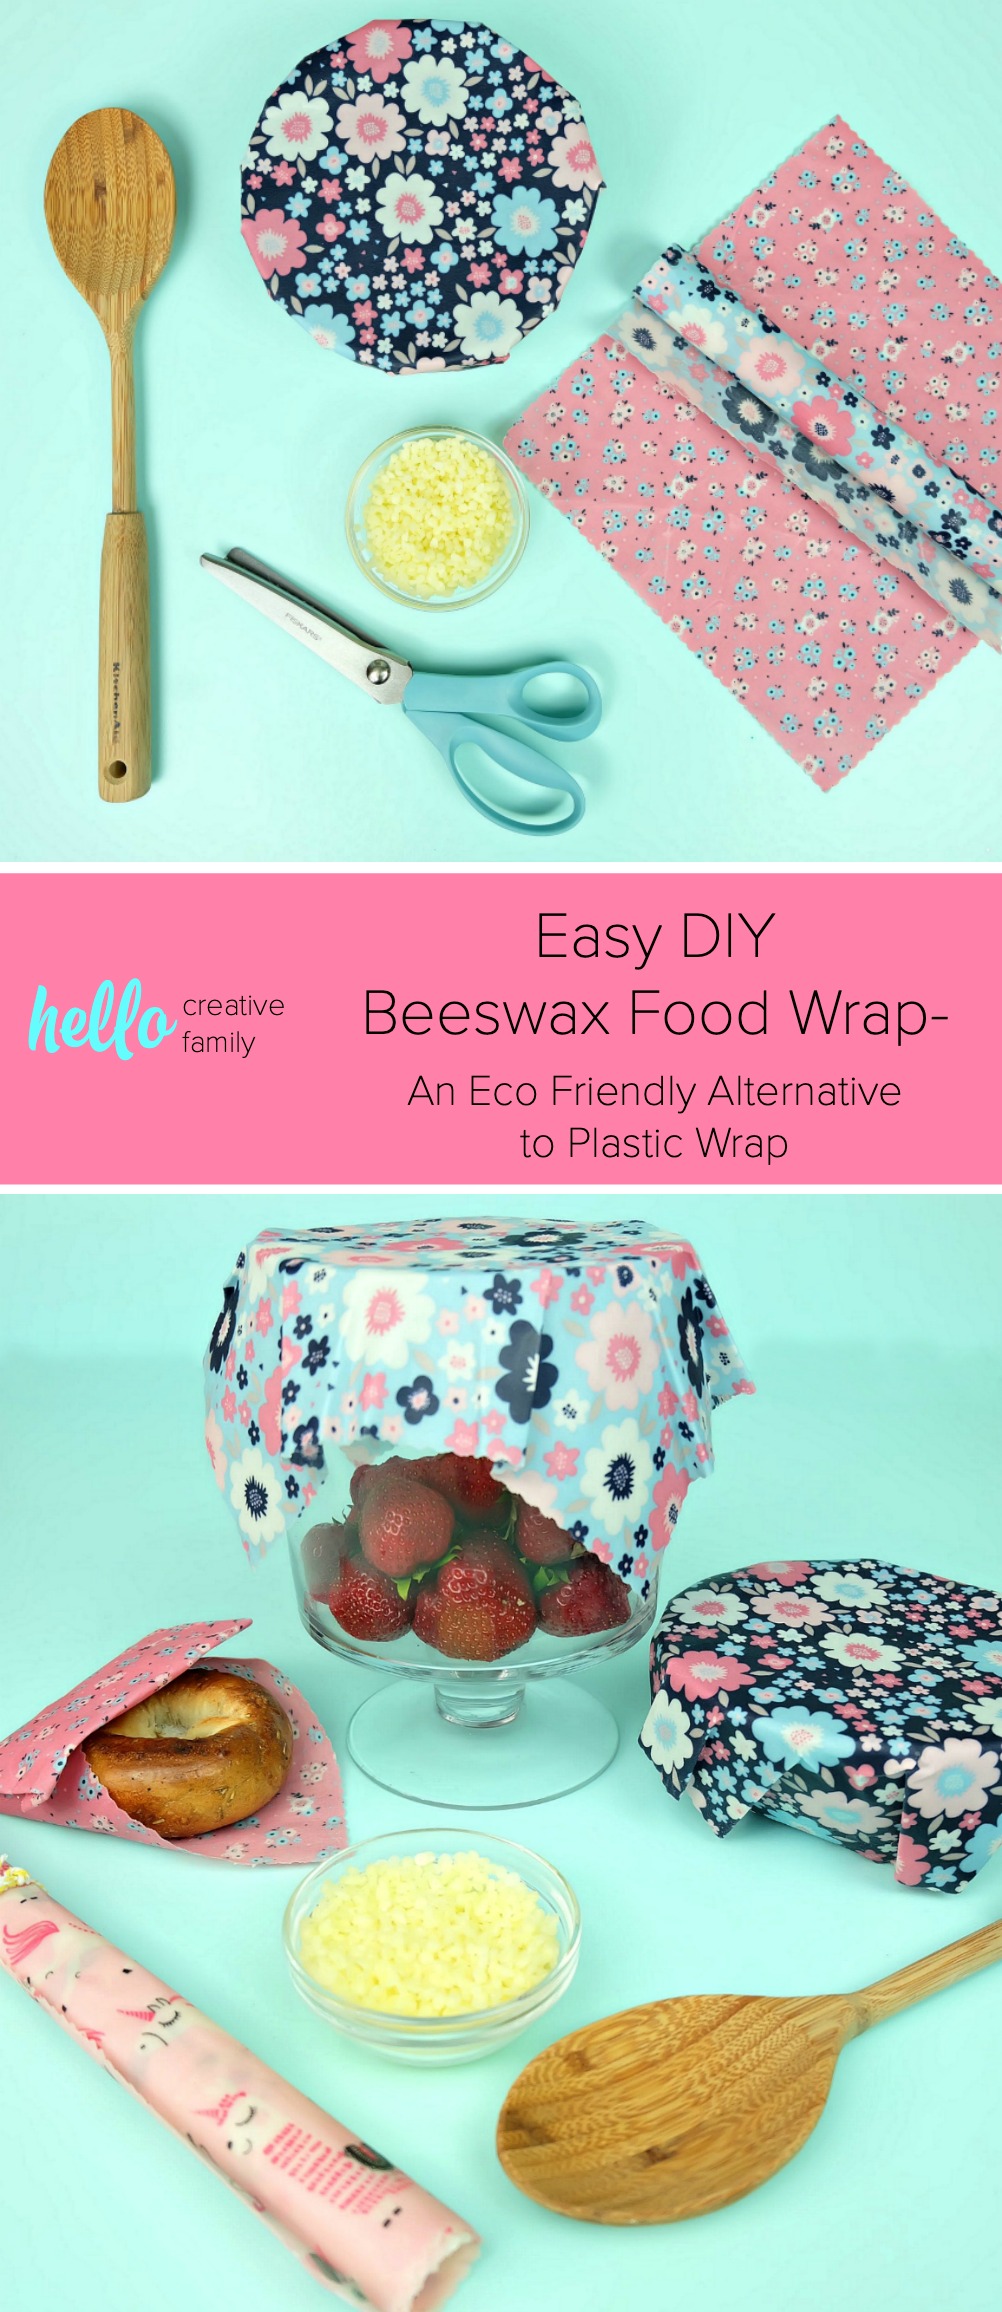 Eliminate single use plastic with this easy and low cost project. DIY Beeswax Food Wrap takes just minutes to make and lasts for years, eliminating the need for plastic wrap. Use to cover bowls and wrap sandwiches, produce and more! This project makes it easy to be environmentally friendly! #EarthDay #EcoFriendly #DIY #Kitchen #Beeswax